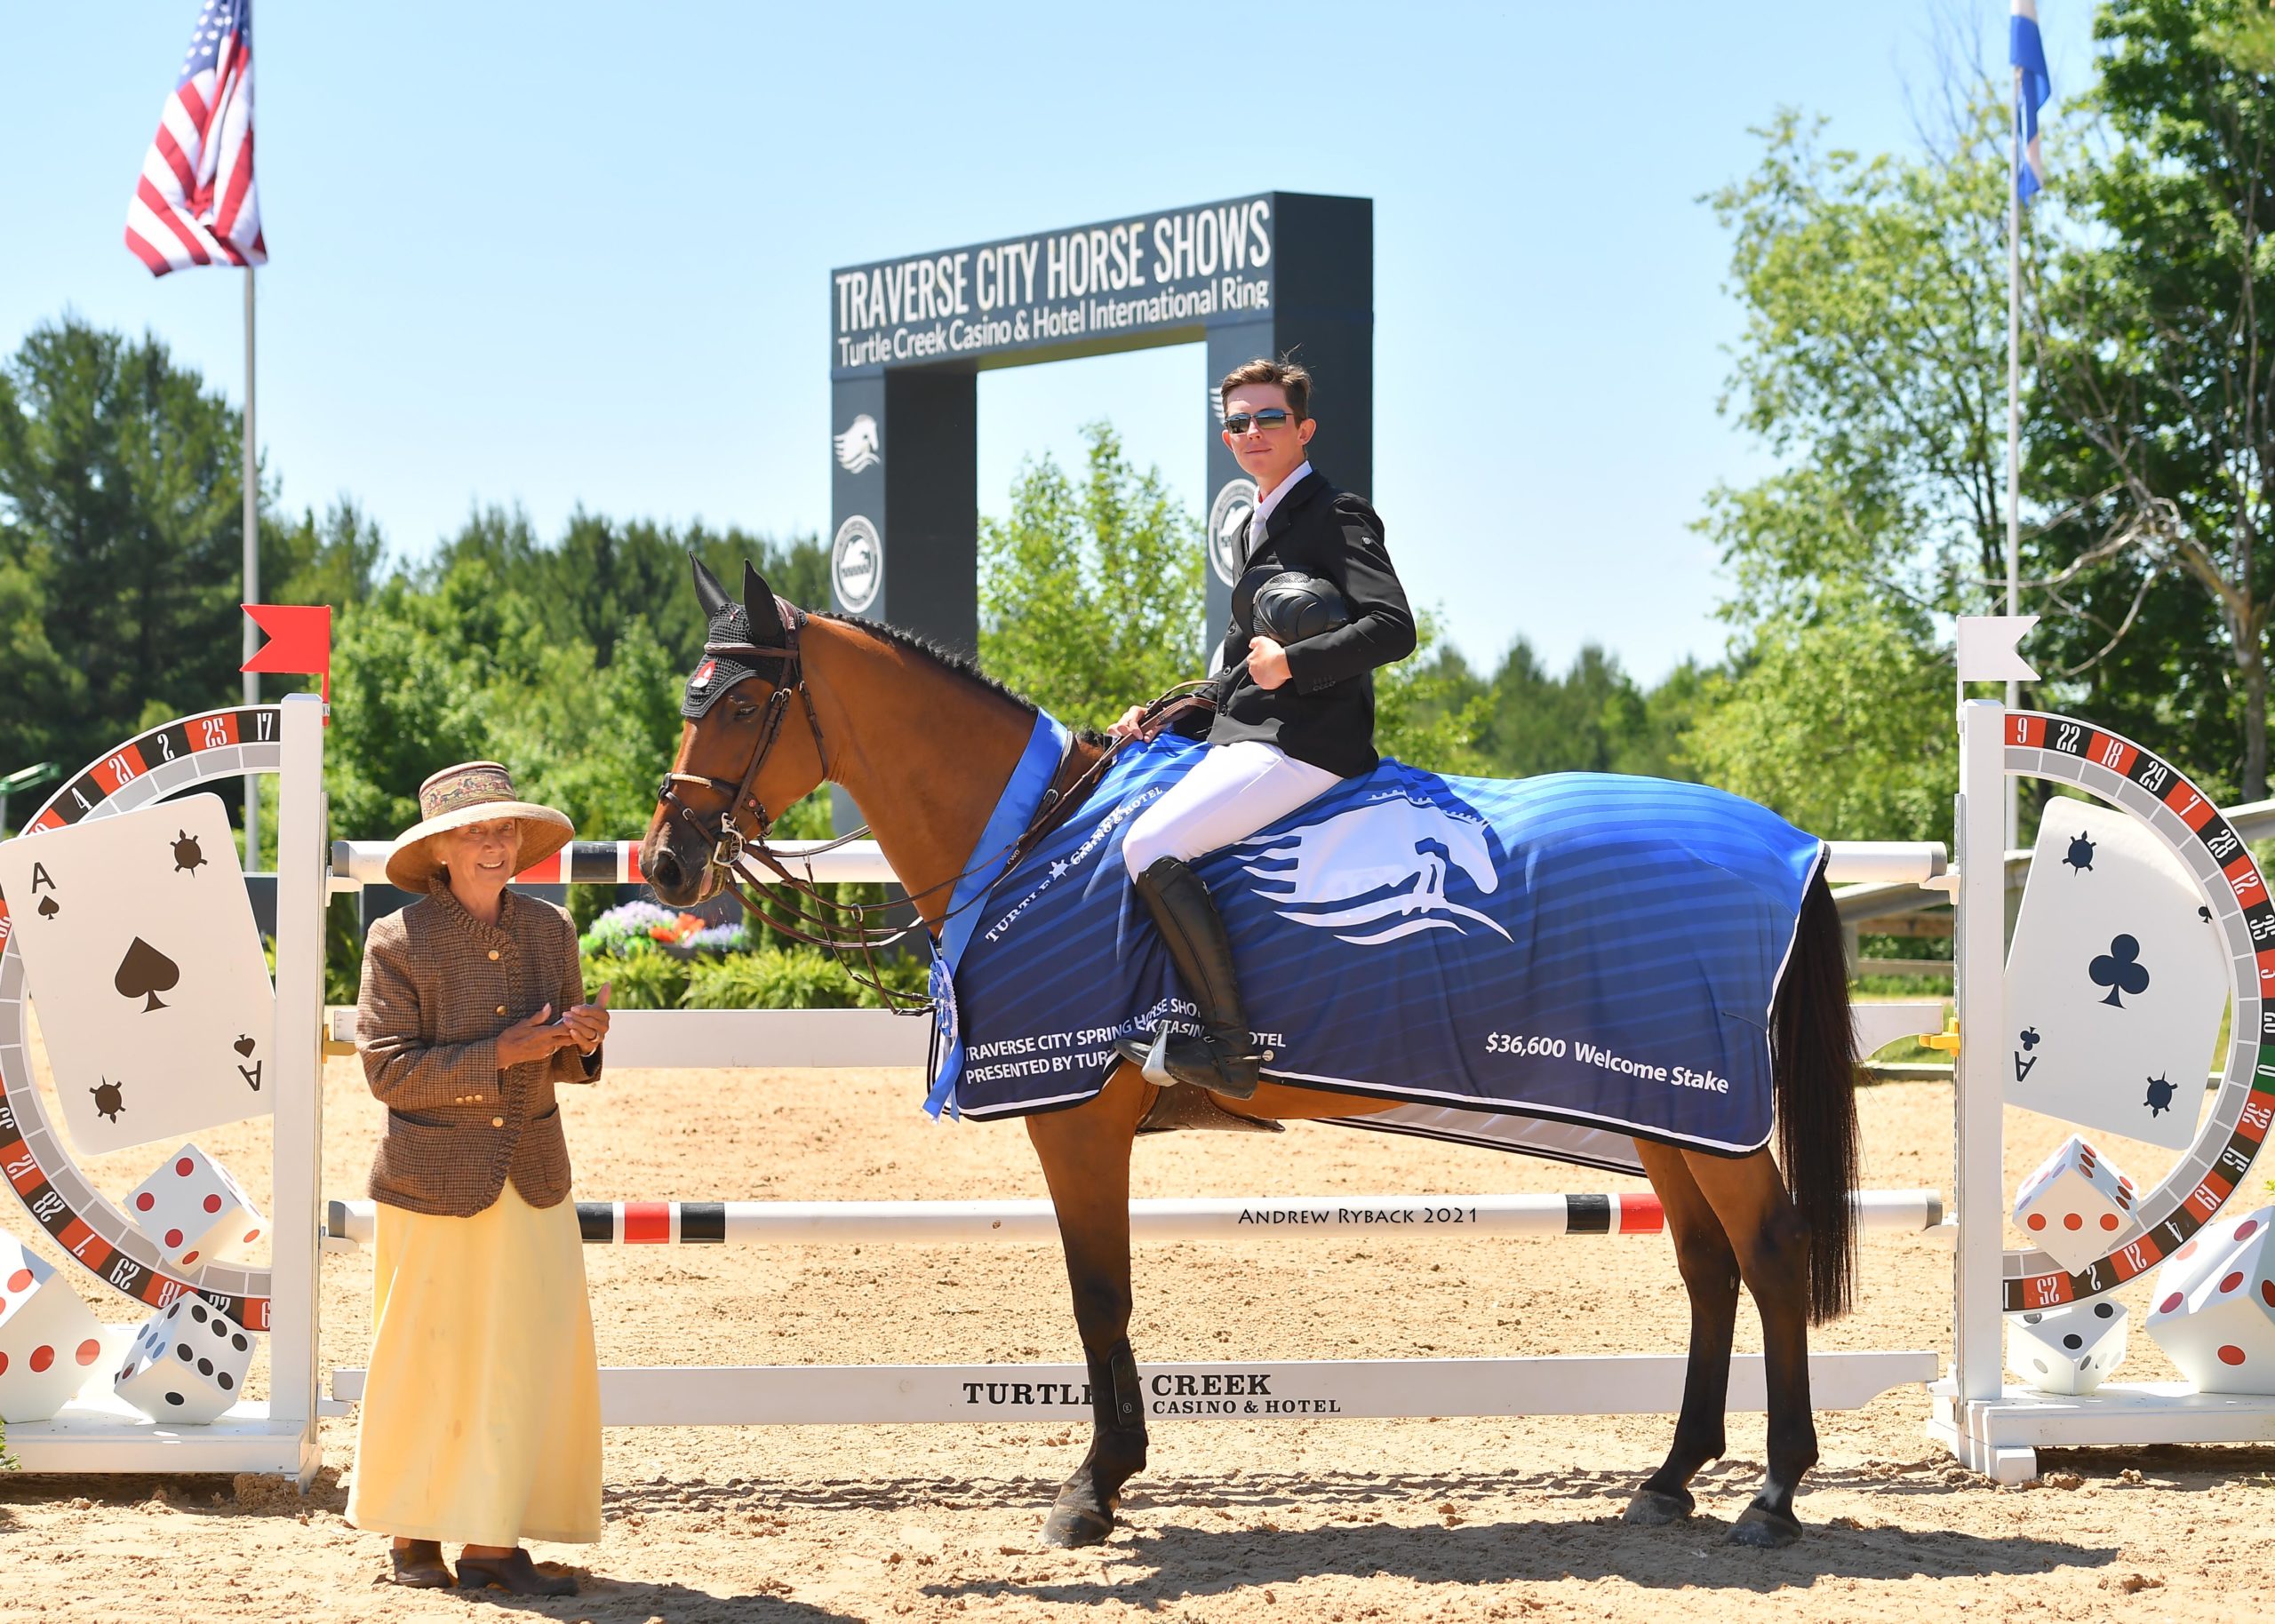 Sam Walker and Evita emerge victorious in CSI2* Welcome Stake at Traverse City